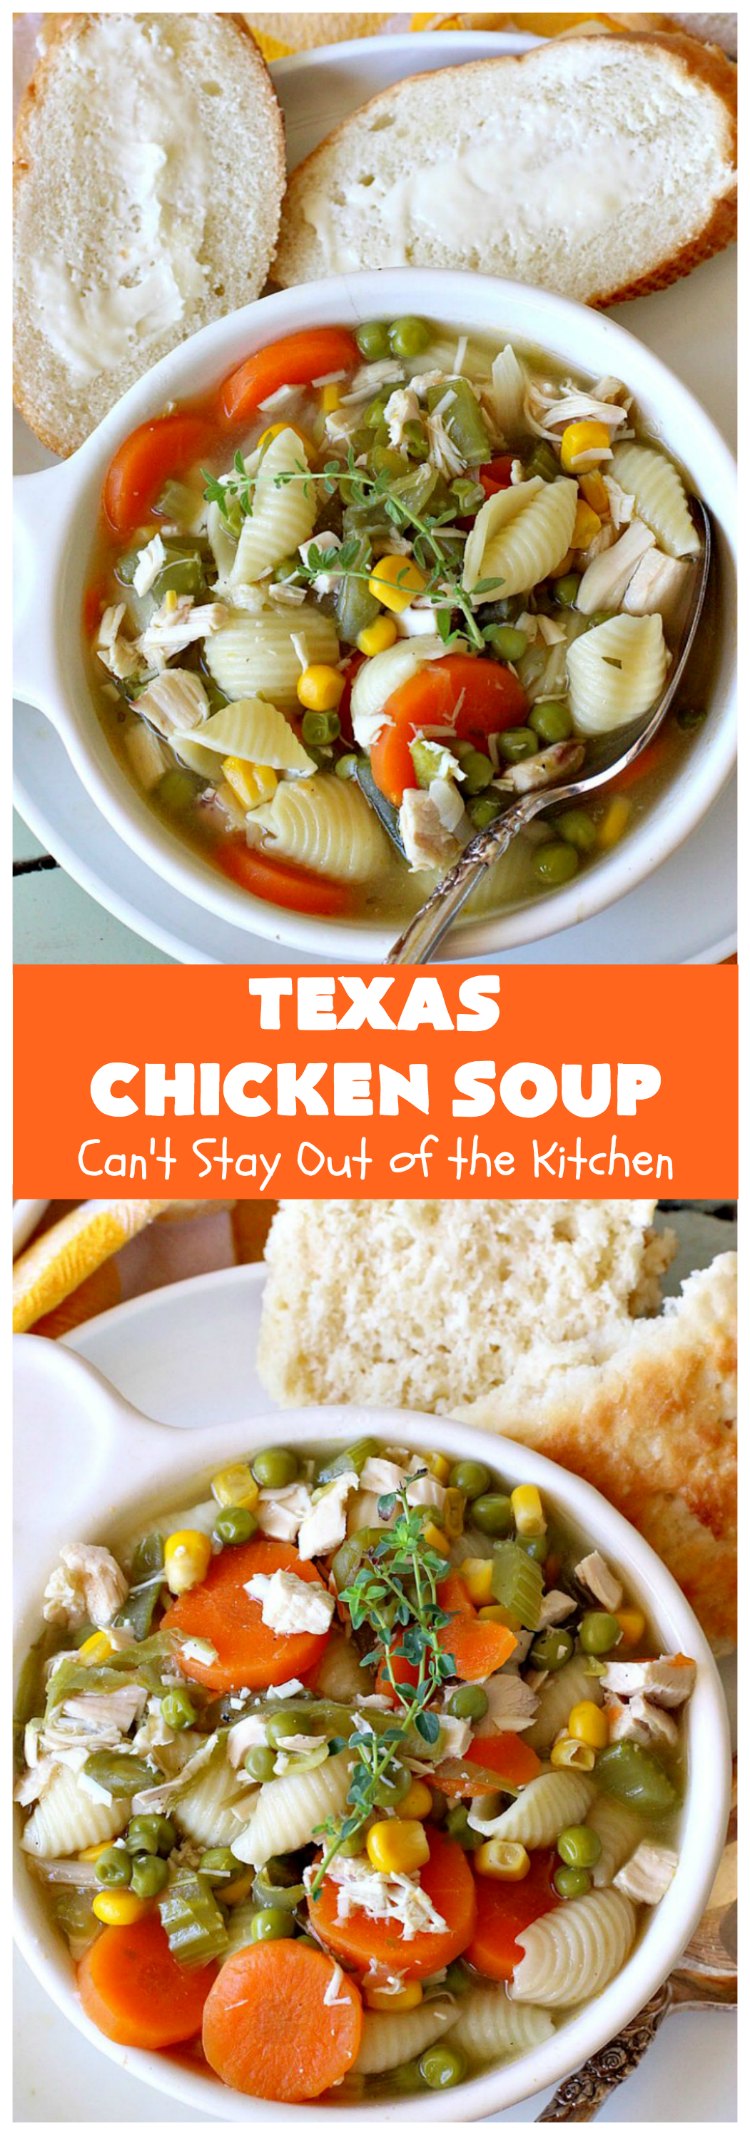 Texas Chicken Soup | Can't Stay Out of the Kitchen | this is a fabulous take off on #ChickenSoup with a little bit of #Texas #HotSauce thrown in to spice it up. Terrific comfort food meal for the fall. #chicken #soup #carrots #corn #noodles #peas #pasta #GreenBeans #TexasChickenSoup